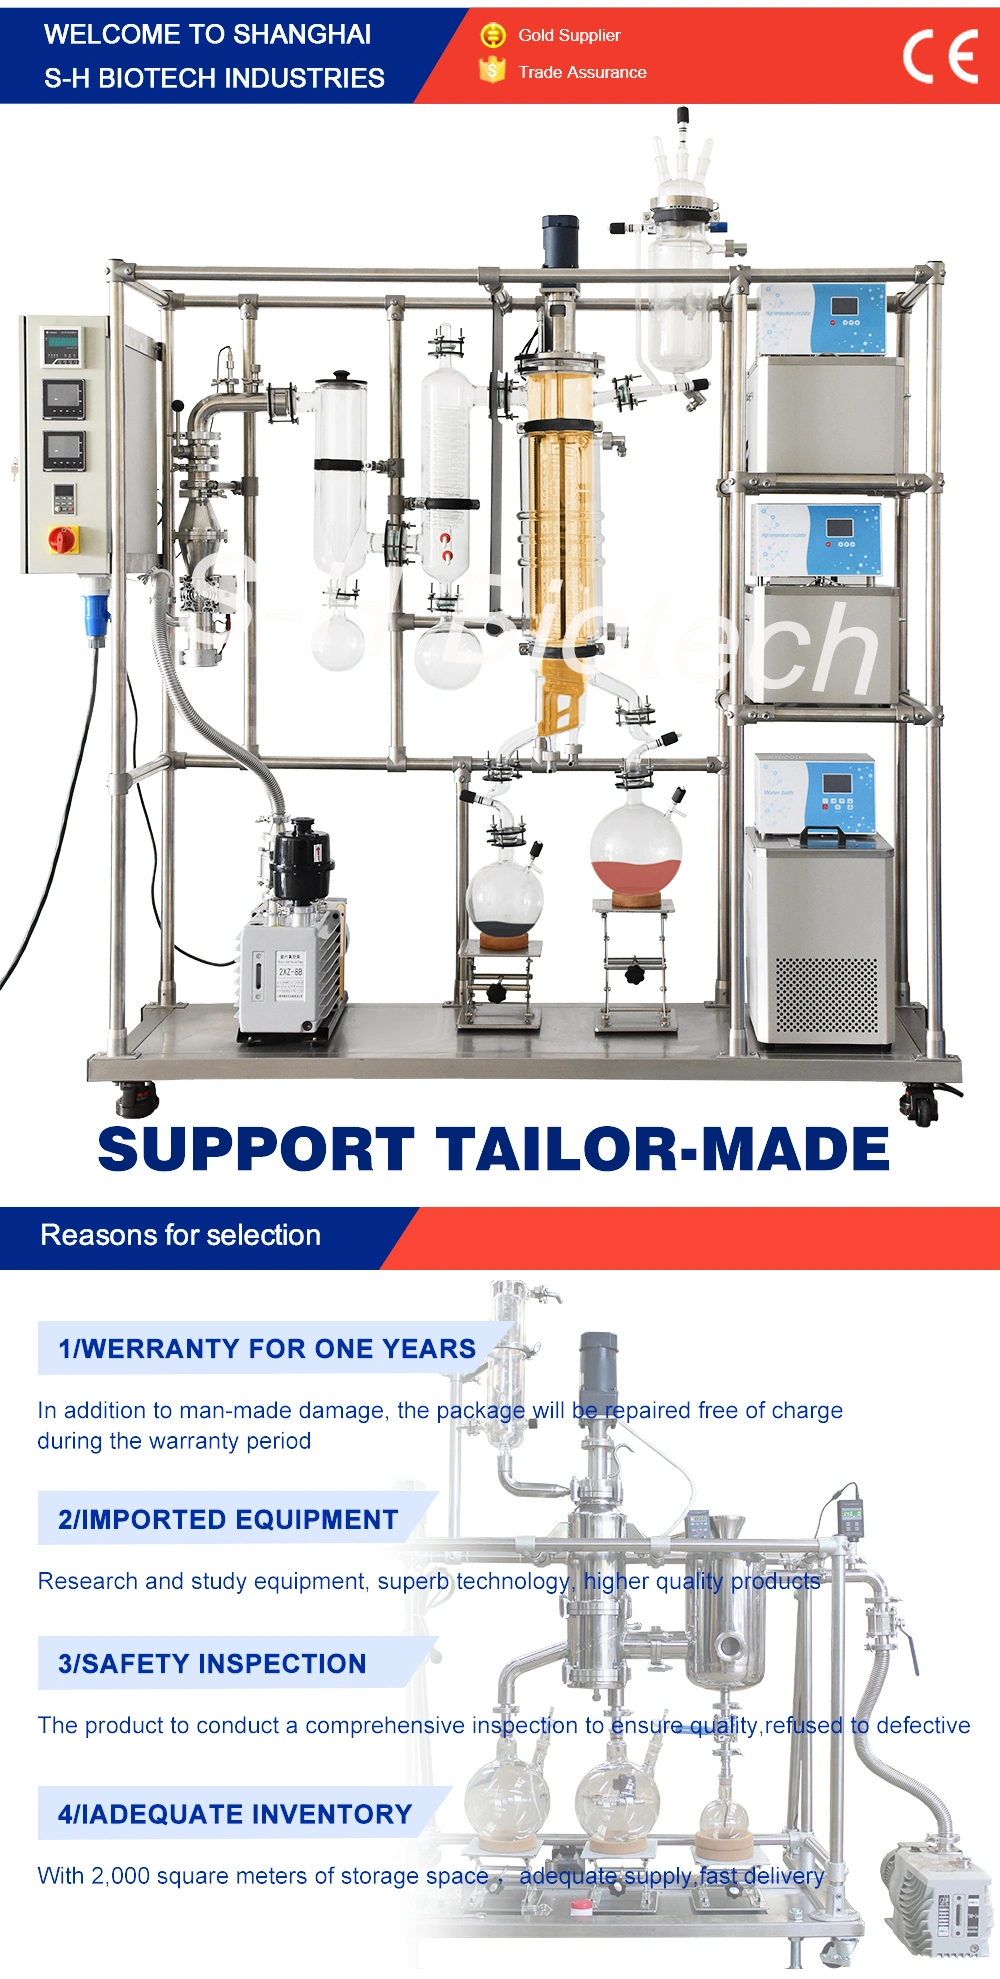 S-H Biotech Automatic Stainless Steel Wiped Film Evaporator Distillation with All-in-One Control Panel Design